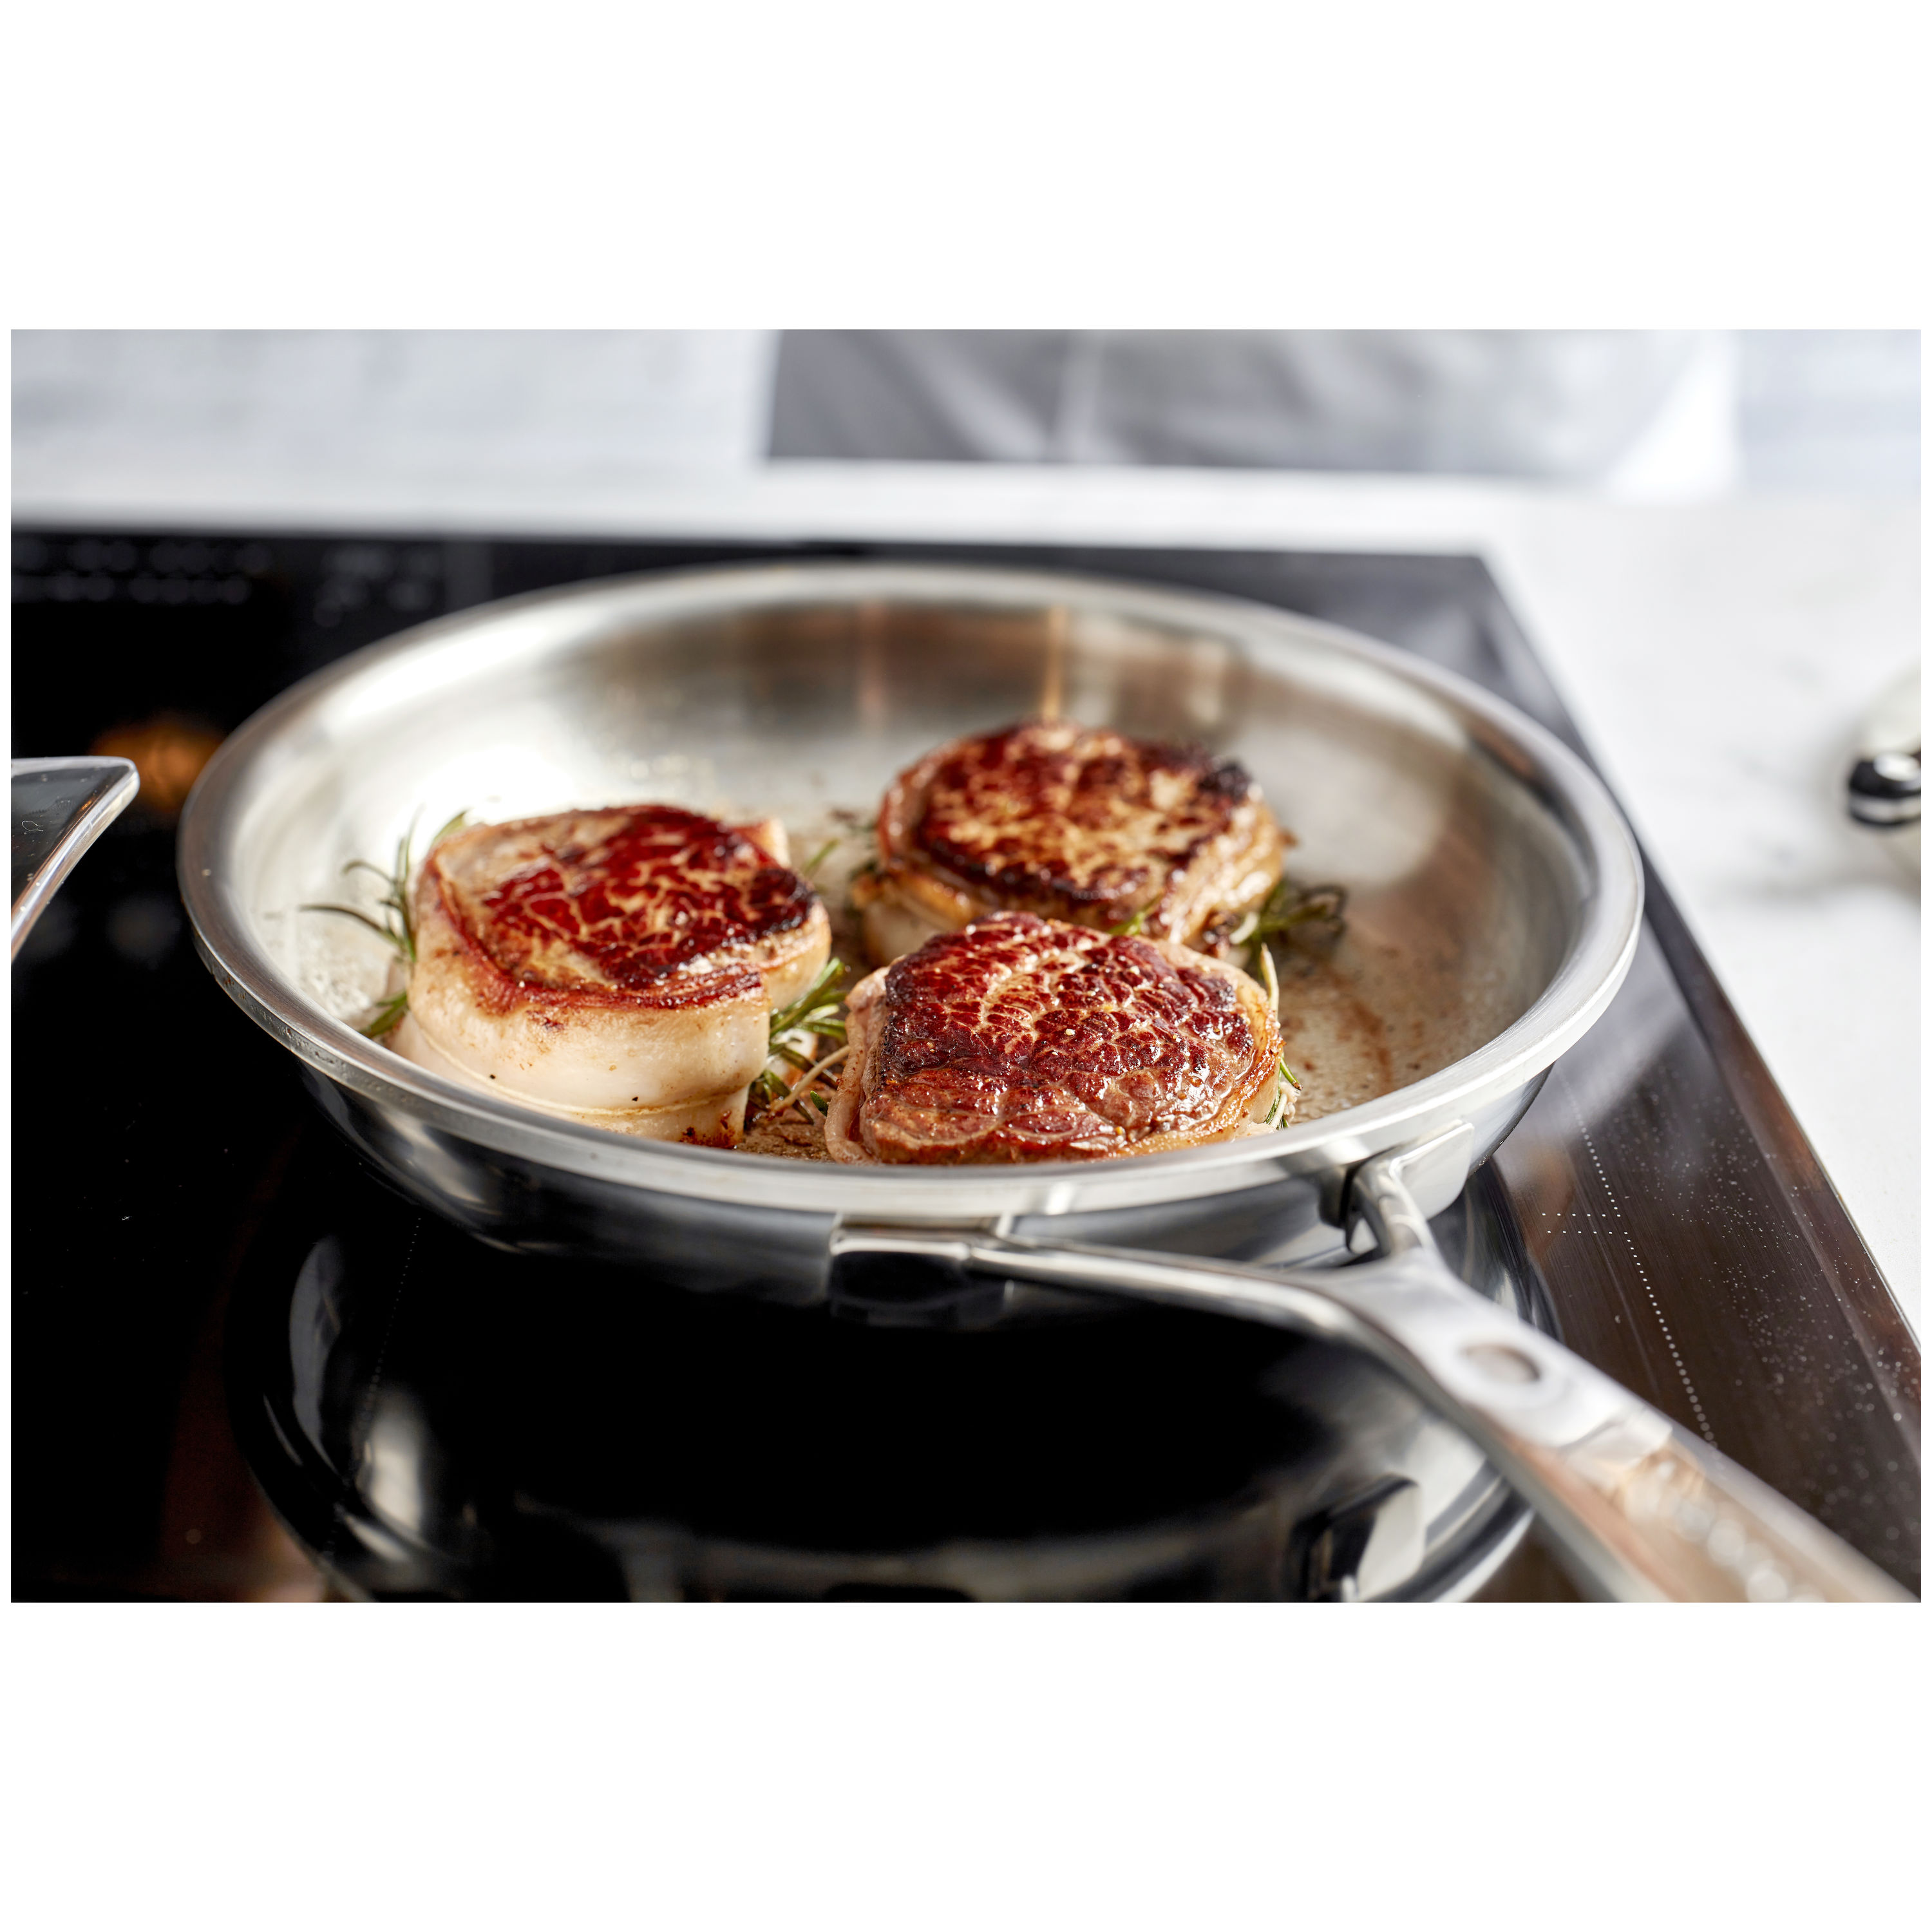 ZWILLING Vitale 8-inch Aluminum Nonstick Fry Pan, 8-inch - Fry's Food Stores